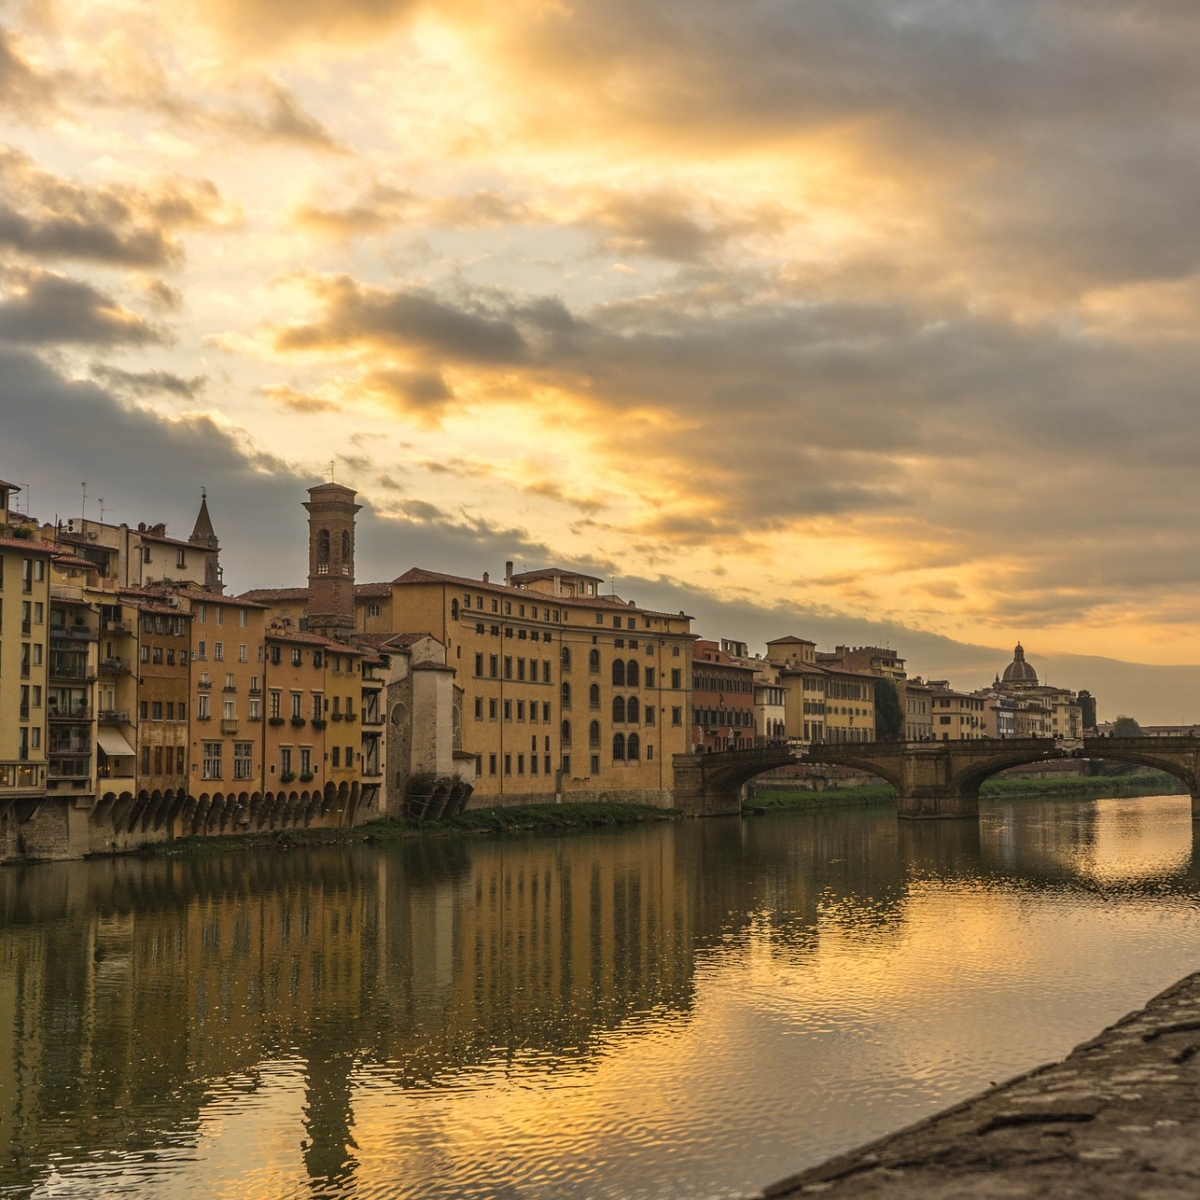 Florence, Italy at sunset